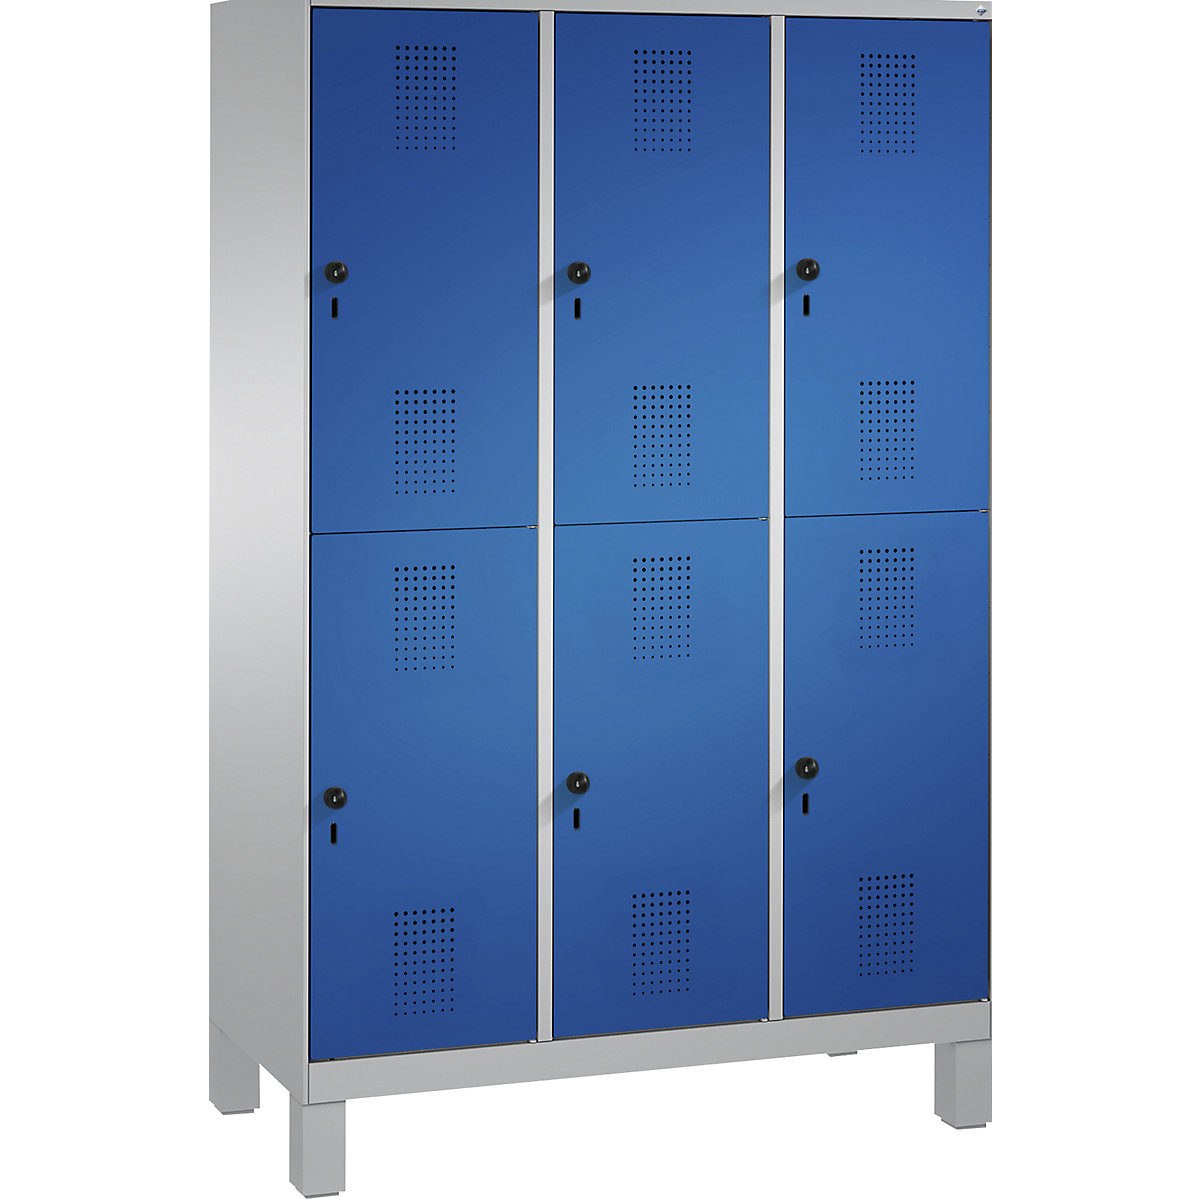 EVOLO cloakroom locker, double tier, with feet – C+P, 3 compartments, 2 shelf compartments each, compartment width 400 mm, white aluminium / gentian blue-1